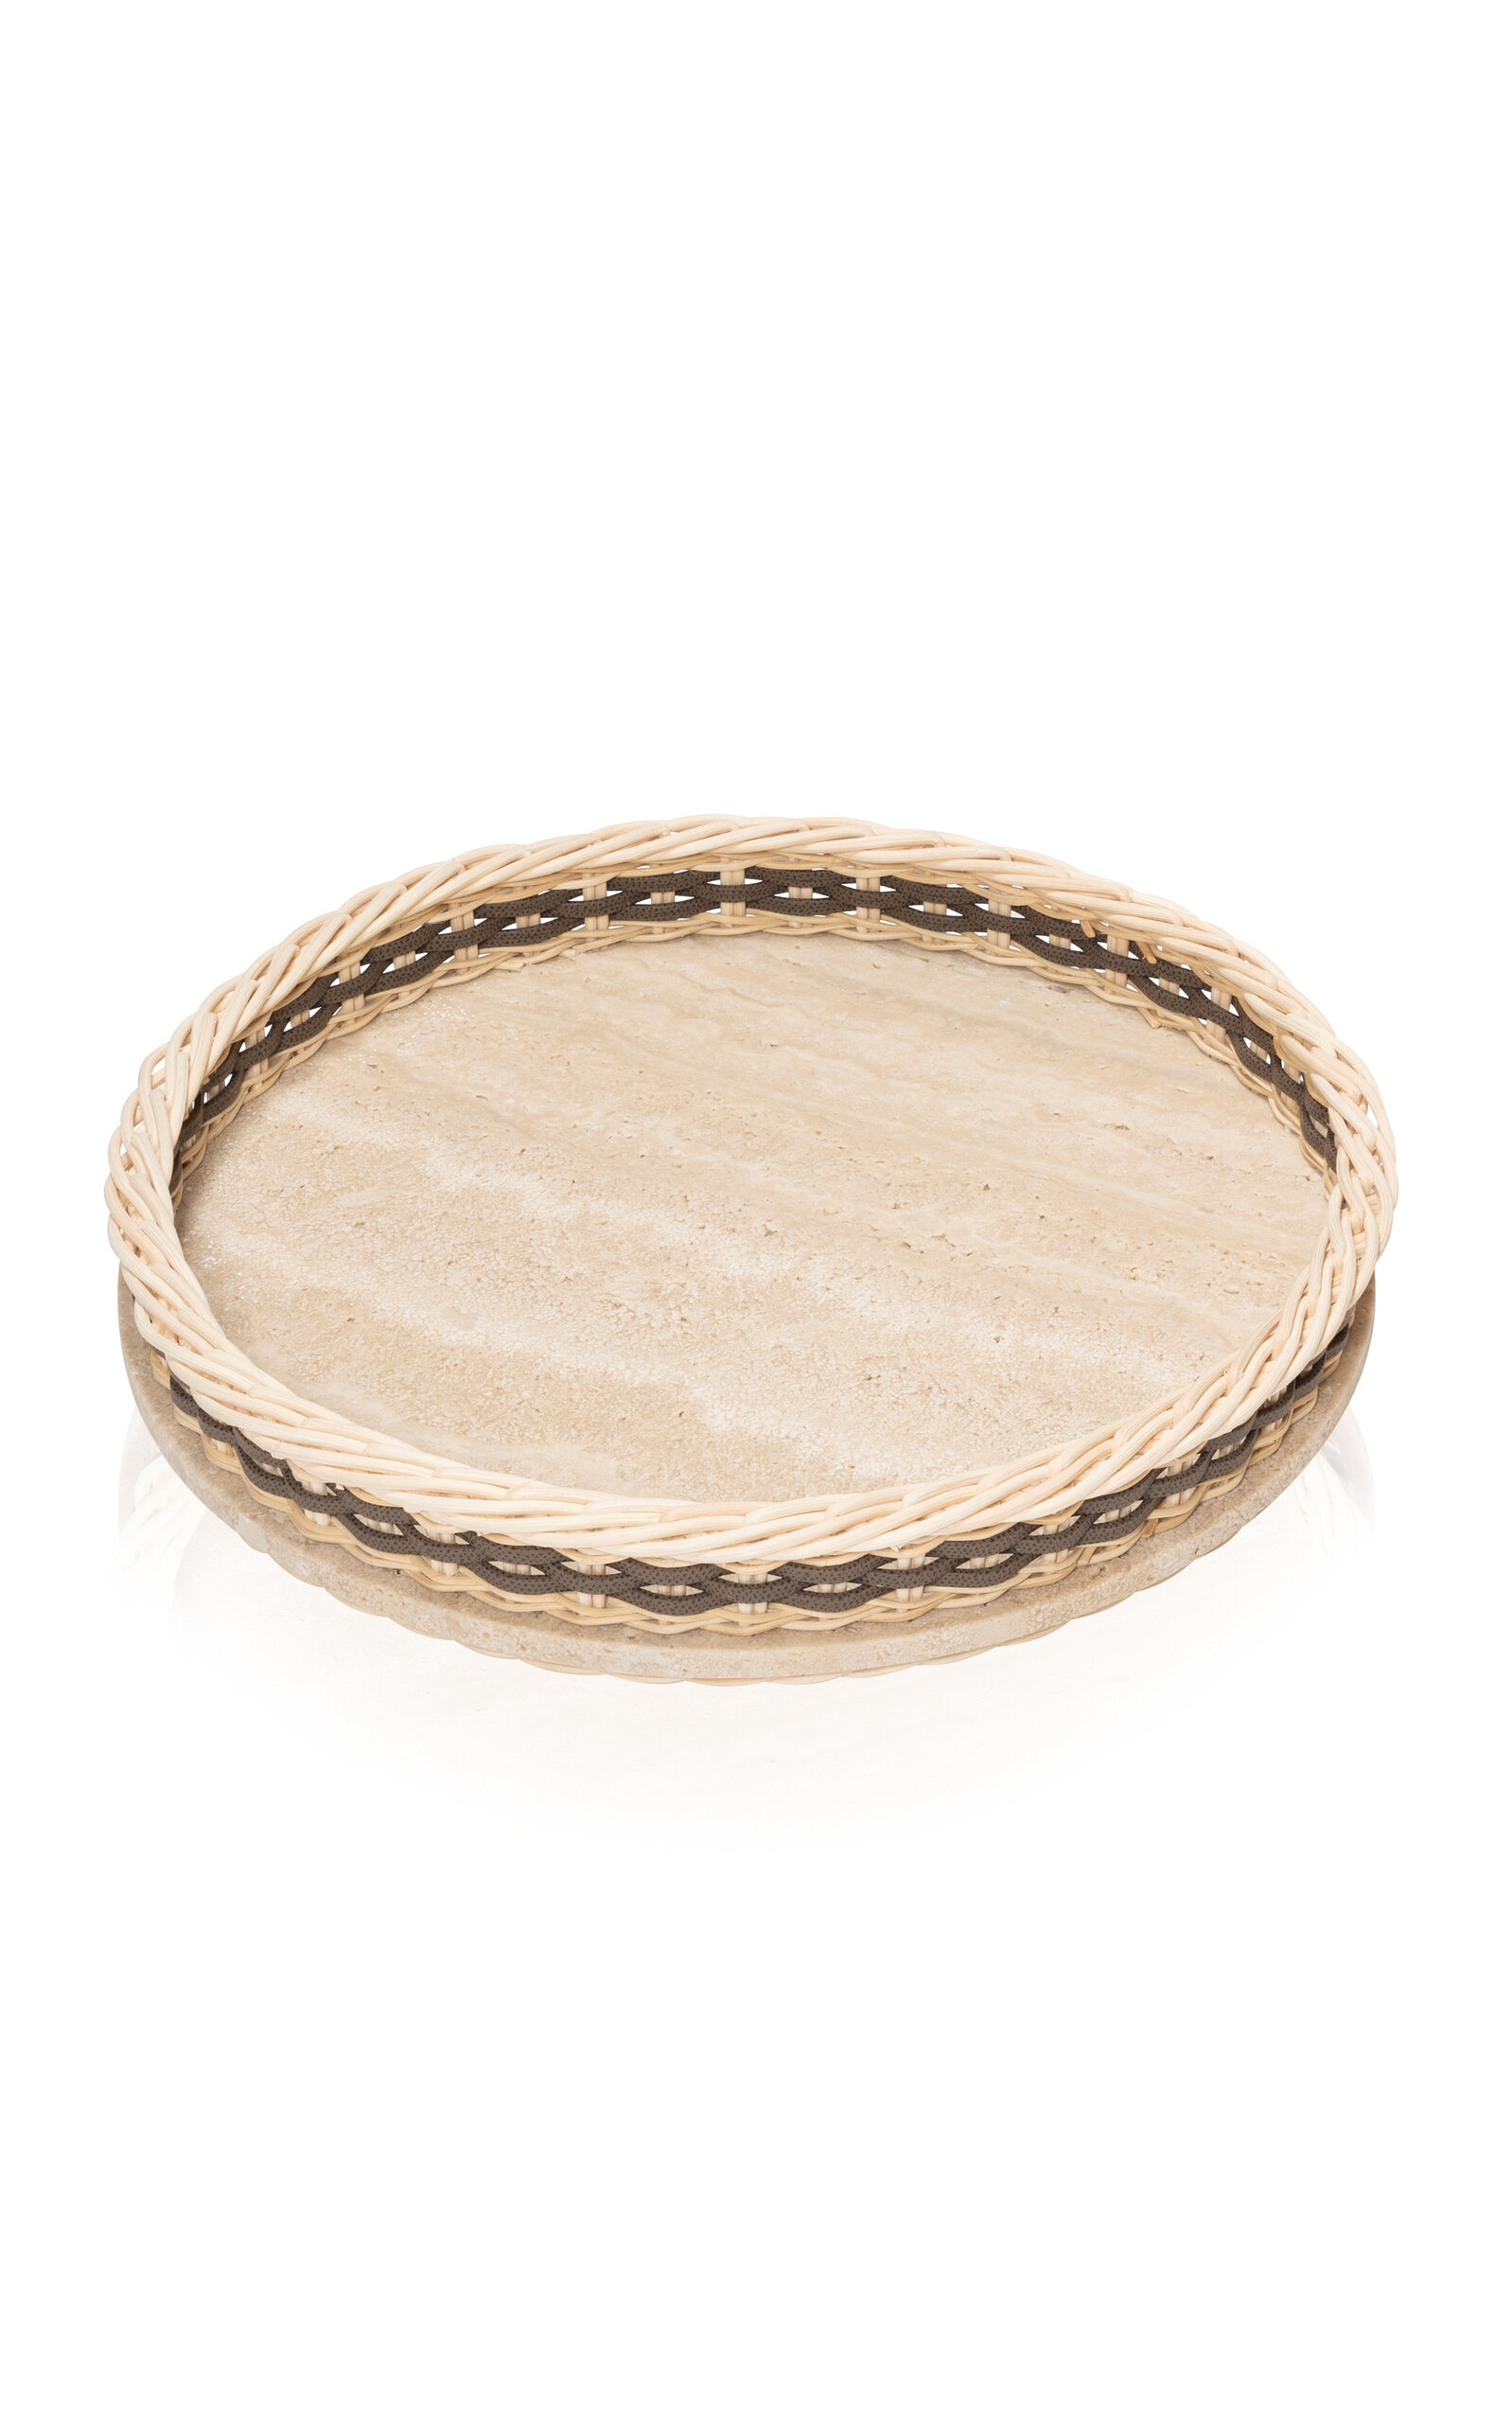 Giobagnara Orsay Small Mrable; Rattan Travertine Tray In Taupe